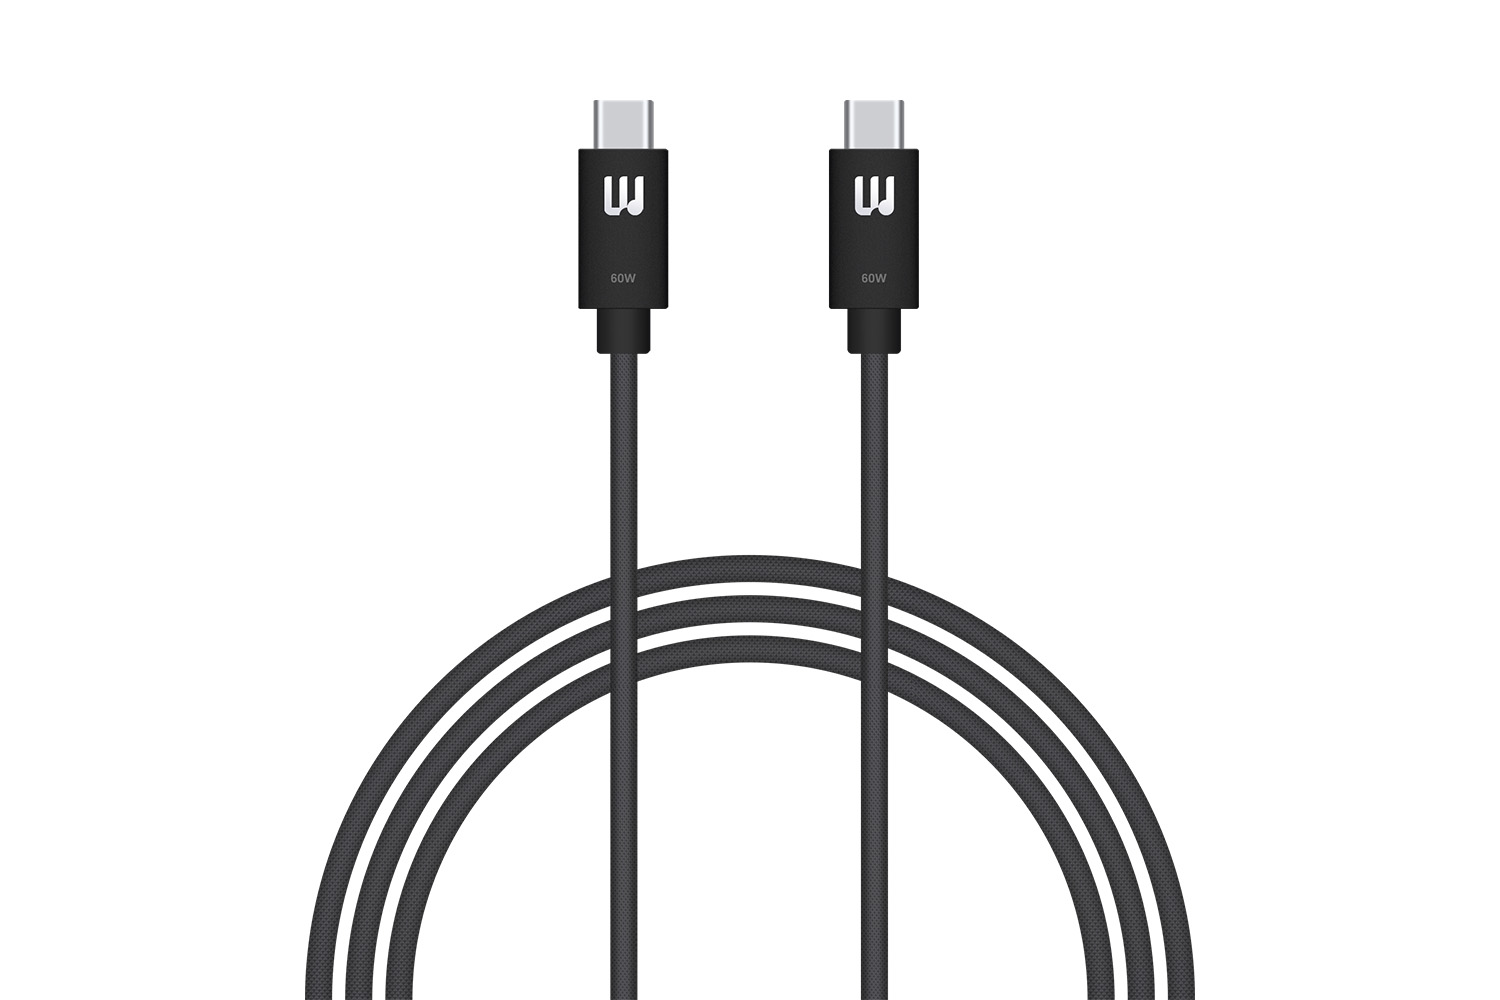 Frism 60W Cable.jpg